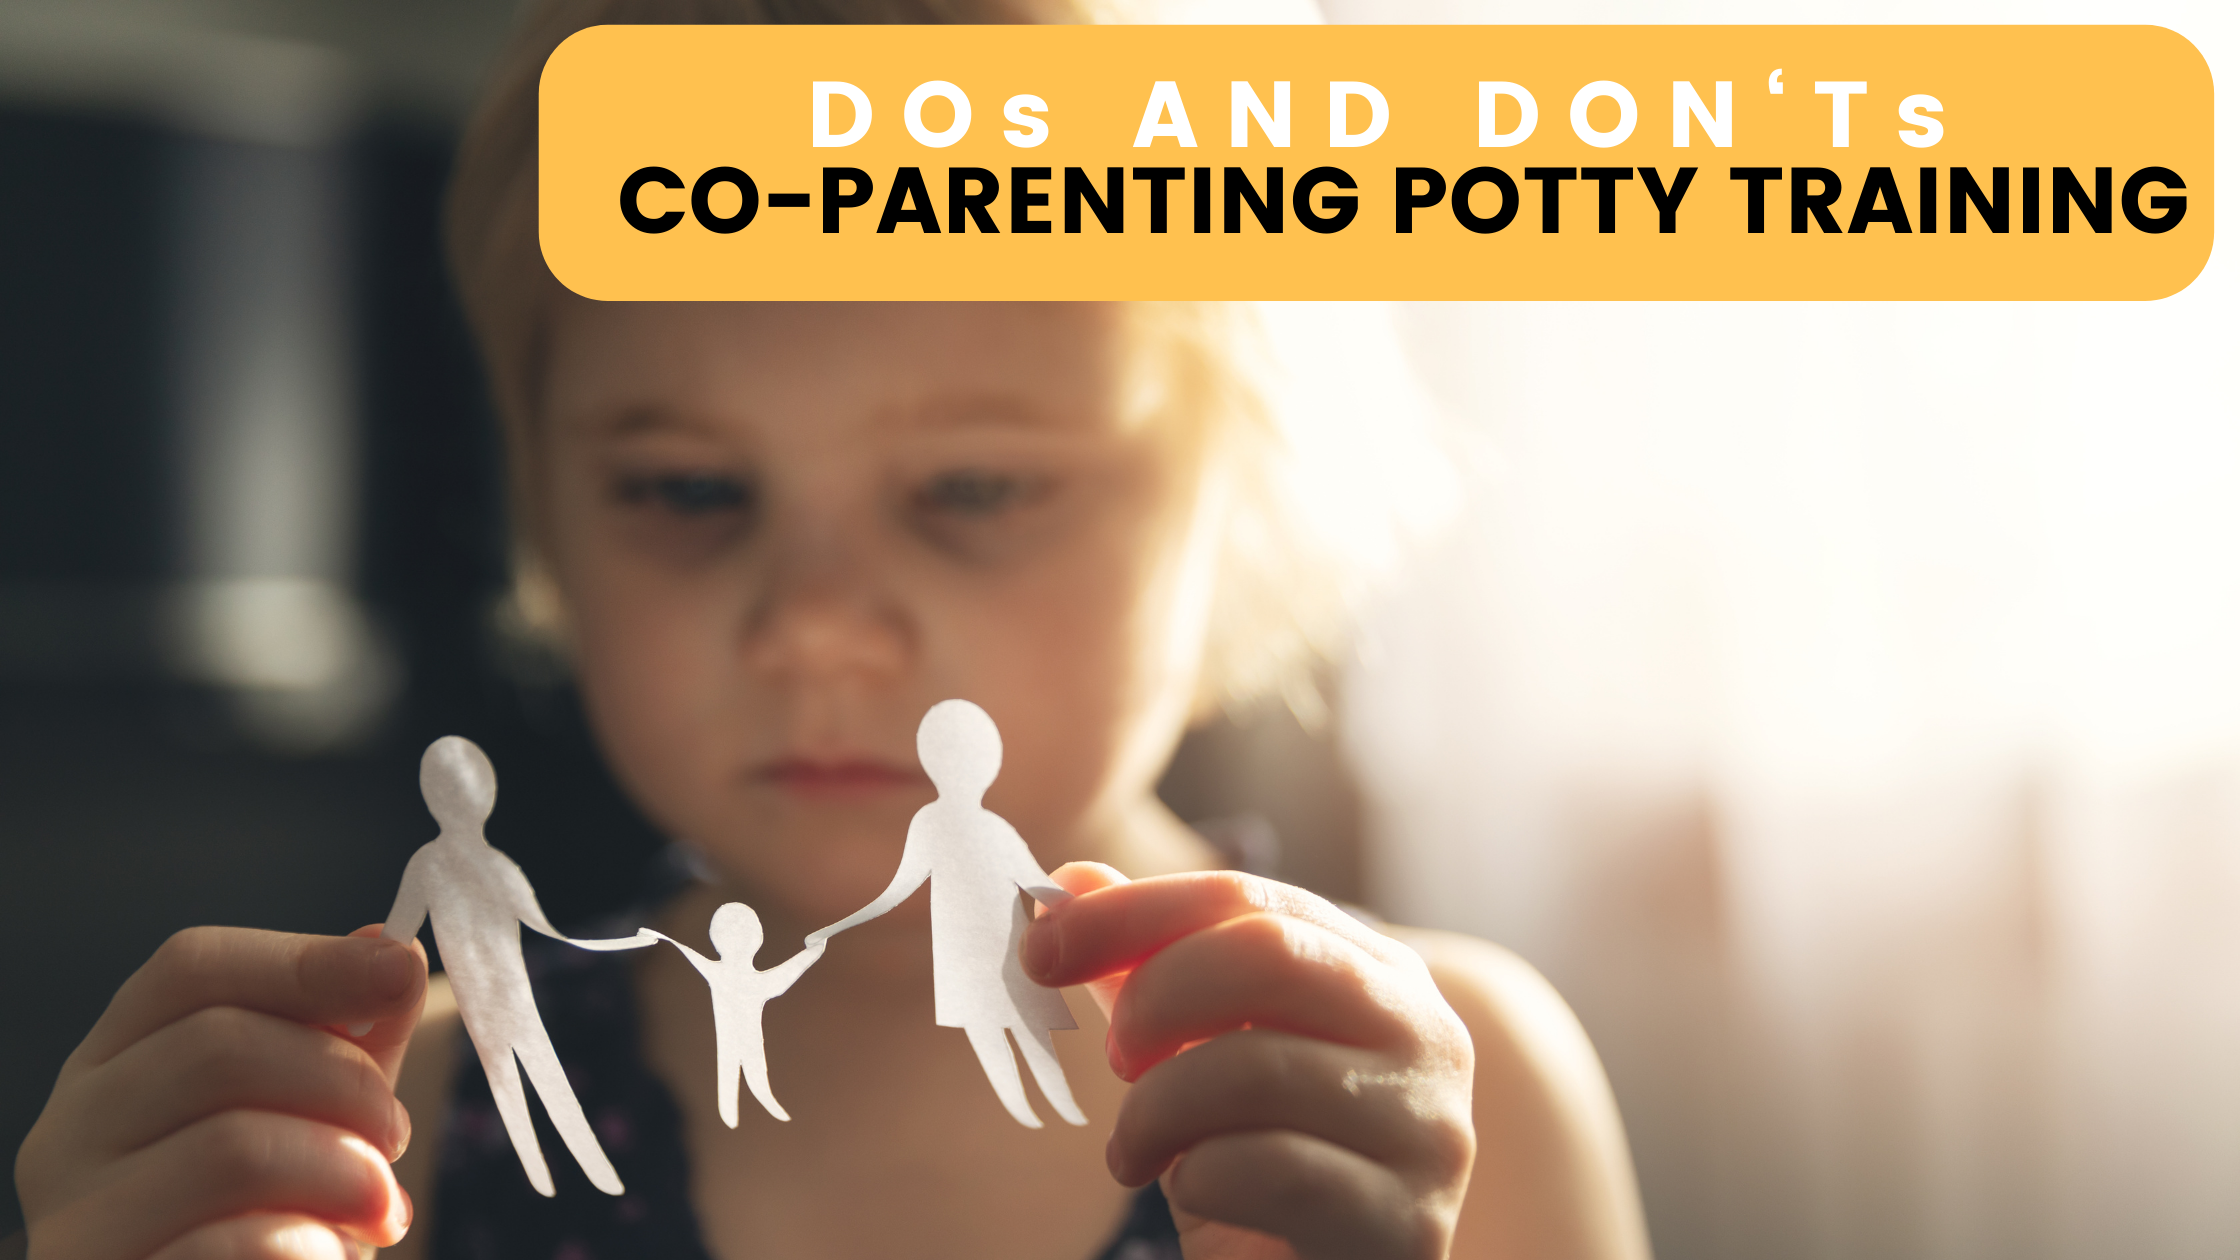 co-parenting and potty training